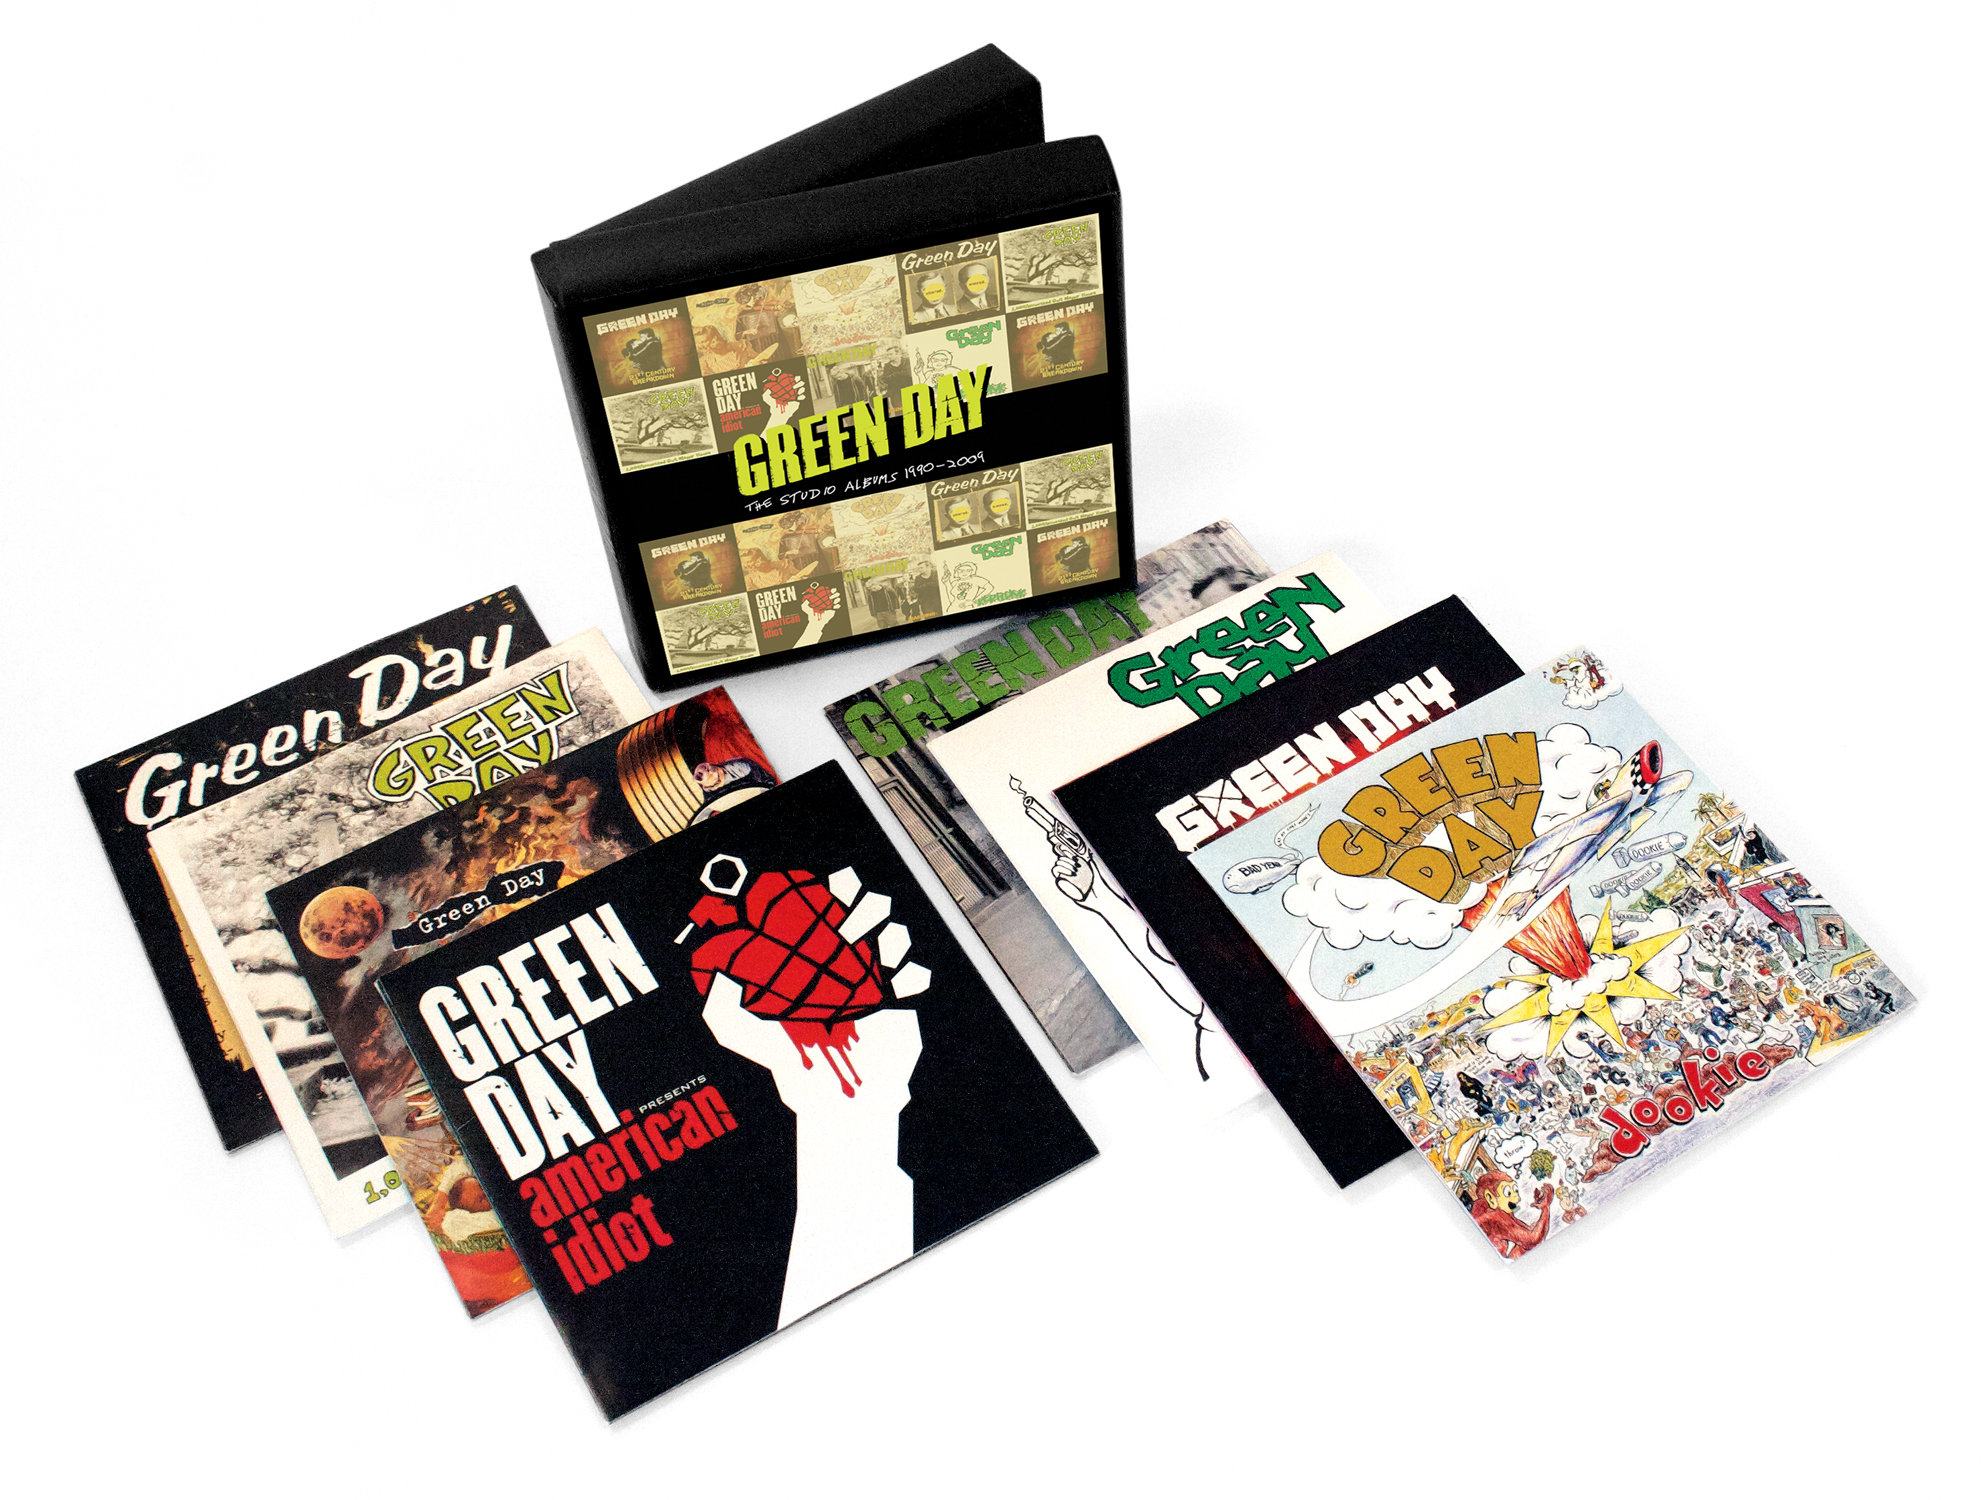 Green Day set to release eight-CD box set ‘The Studio Albums 1990-2009’